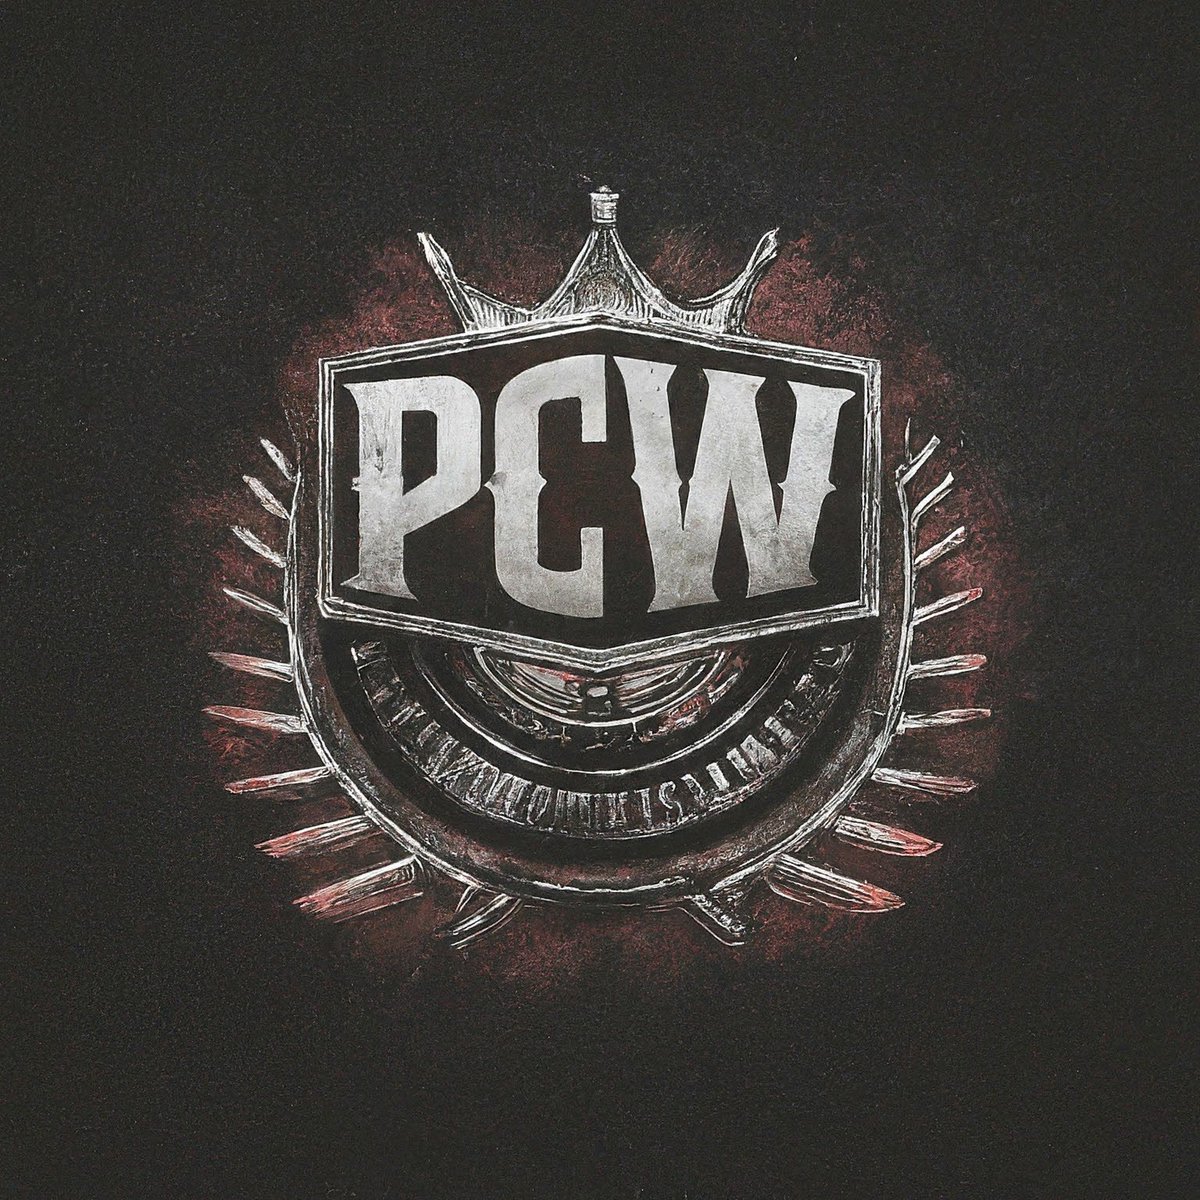 Okay now that the first ever pcw show is done, how’d we feel about the show🤔